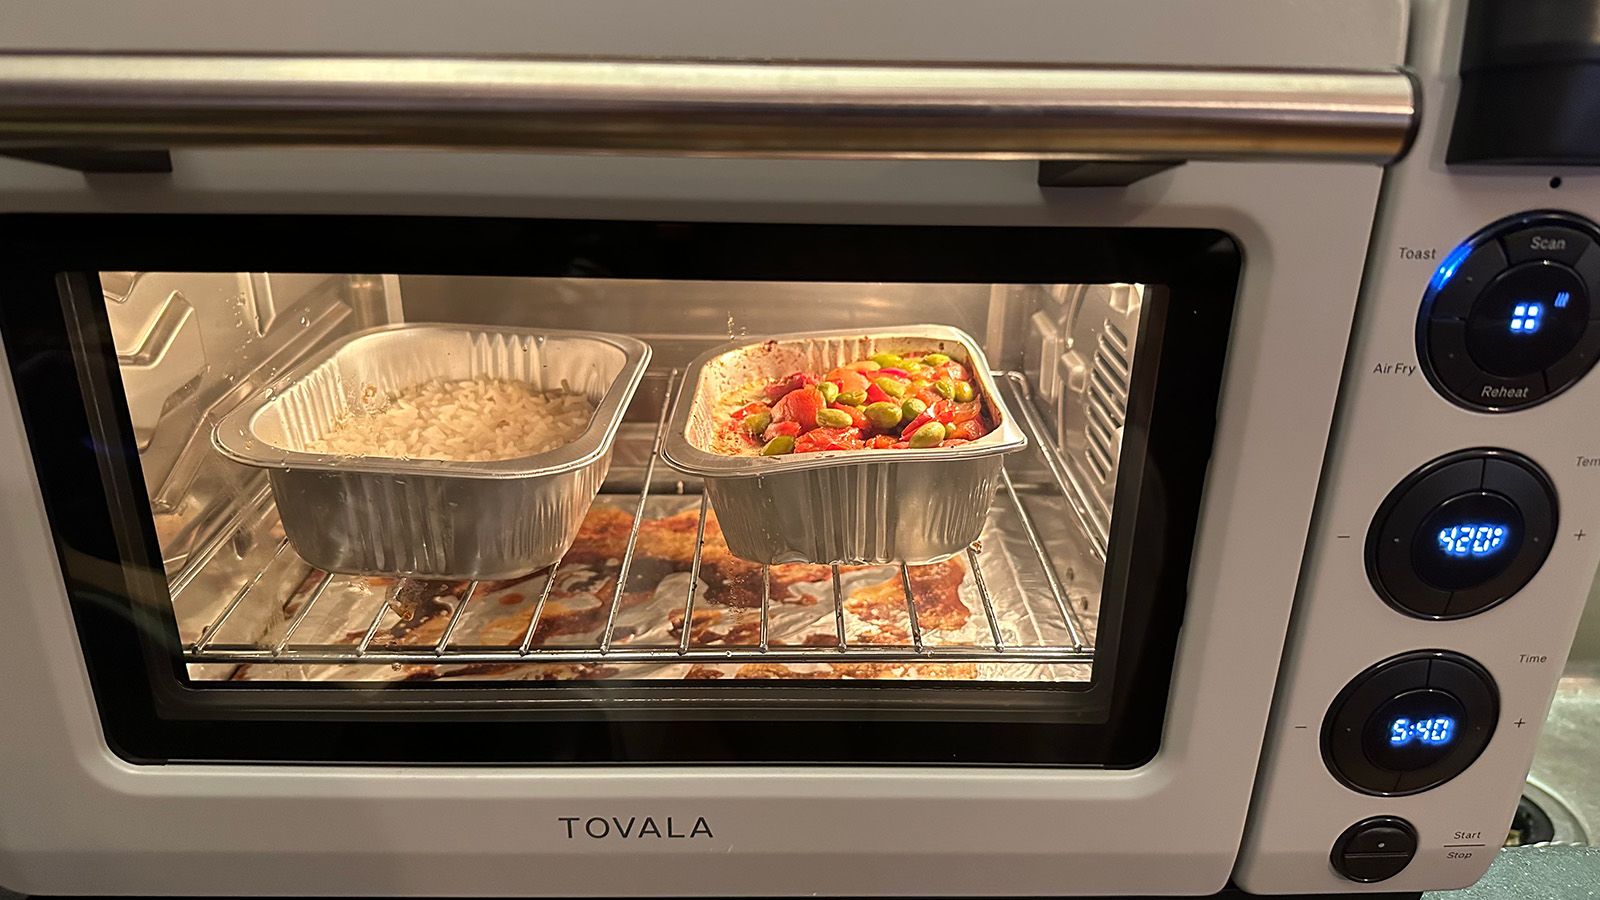 Tovala Smart Oven, 5-in-1 Air Fryer Oven Combo - Air Fry, Bake